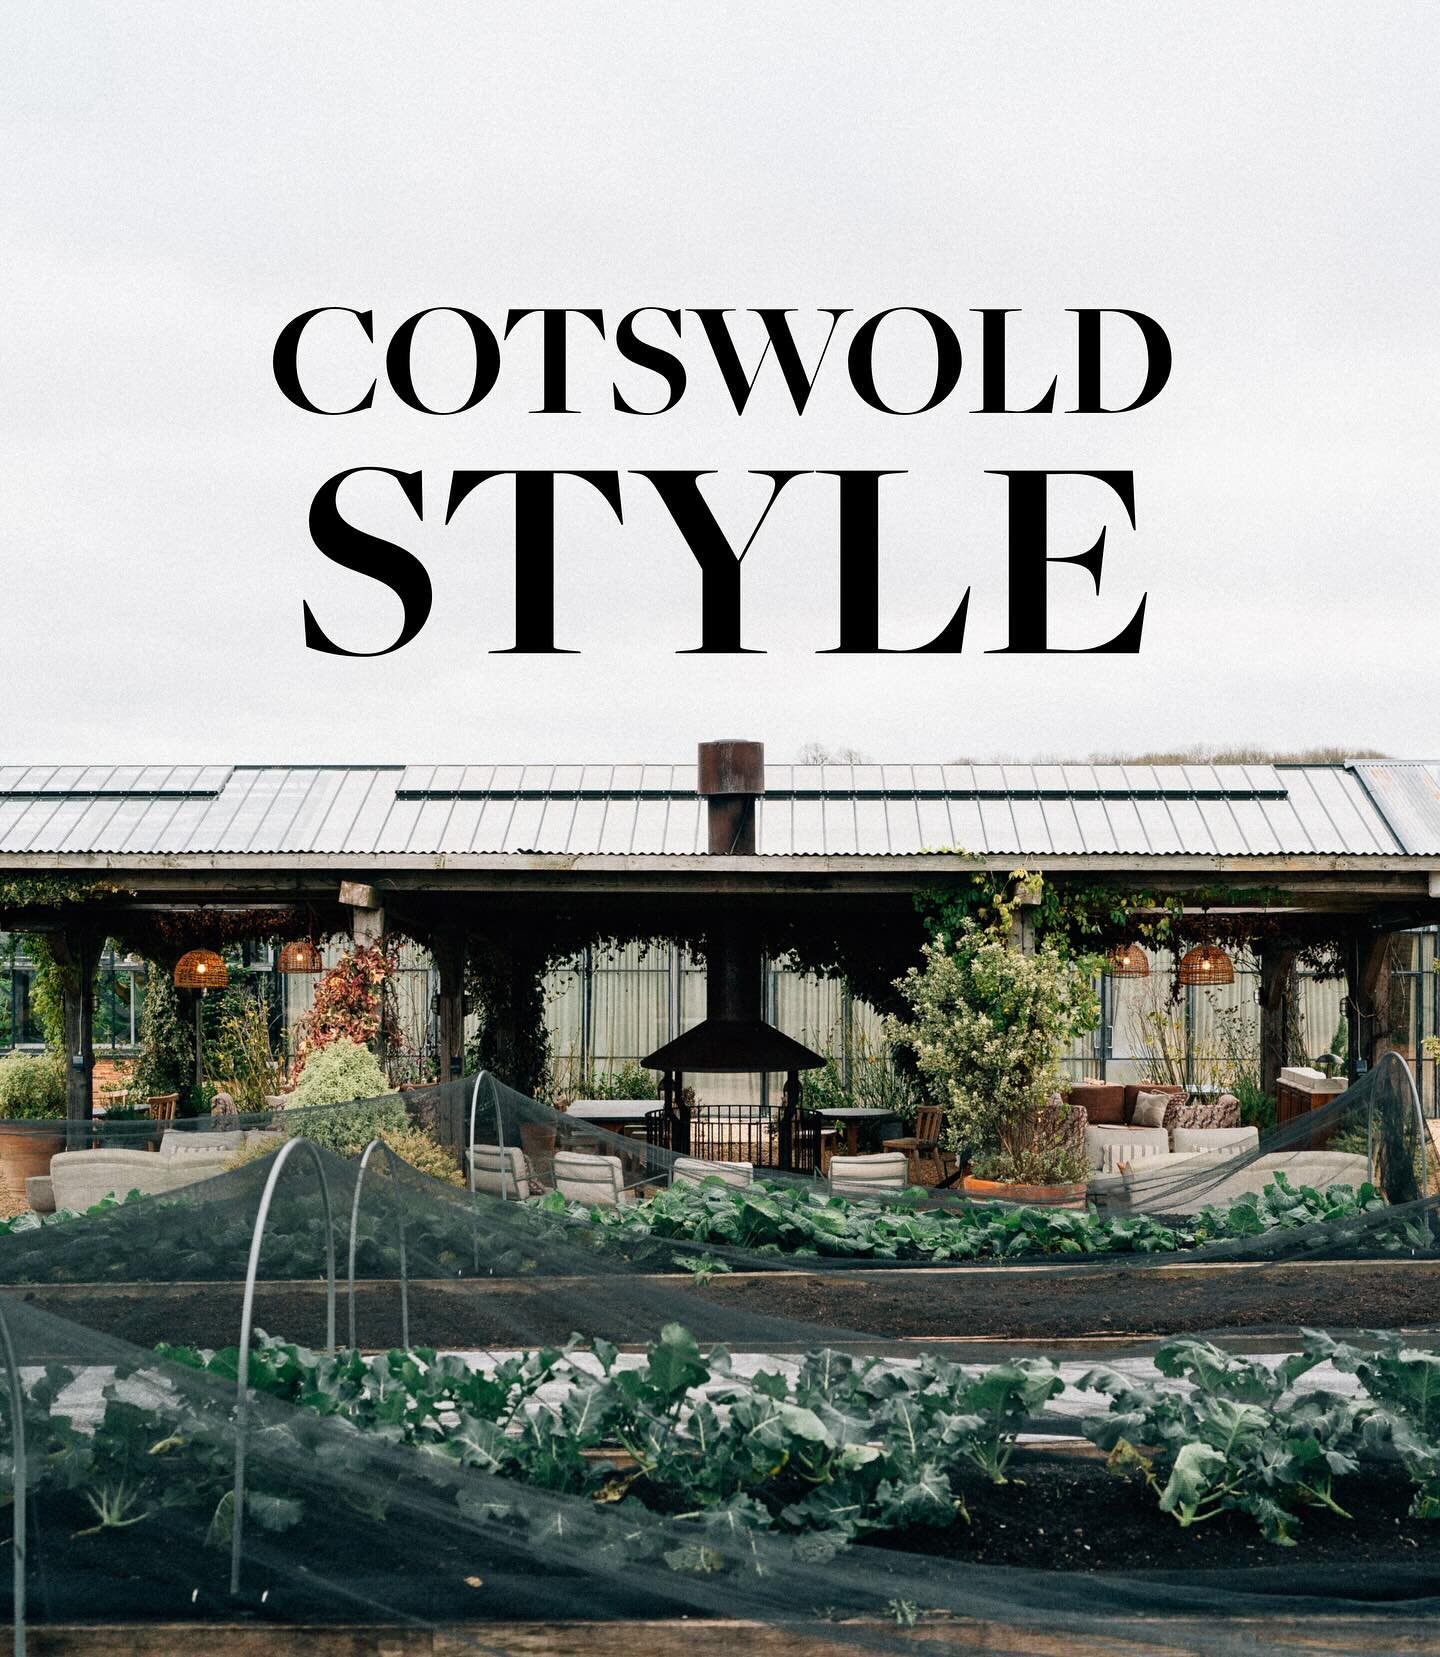 Two years of Cotswold Style.

2 years ago today, Cotswold Style launched, a digital brand showcasing the finest of the Cotswolds. Today we are one of the leading magazines dedicated to travel, people and lifestyle in the Cotswolds, with over 35,000 f